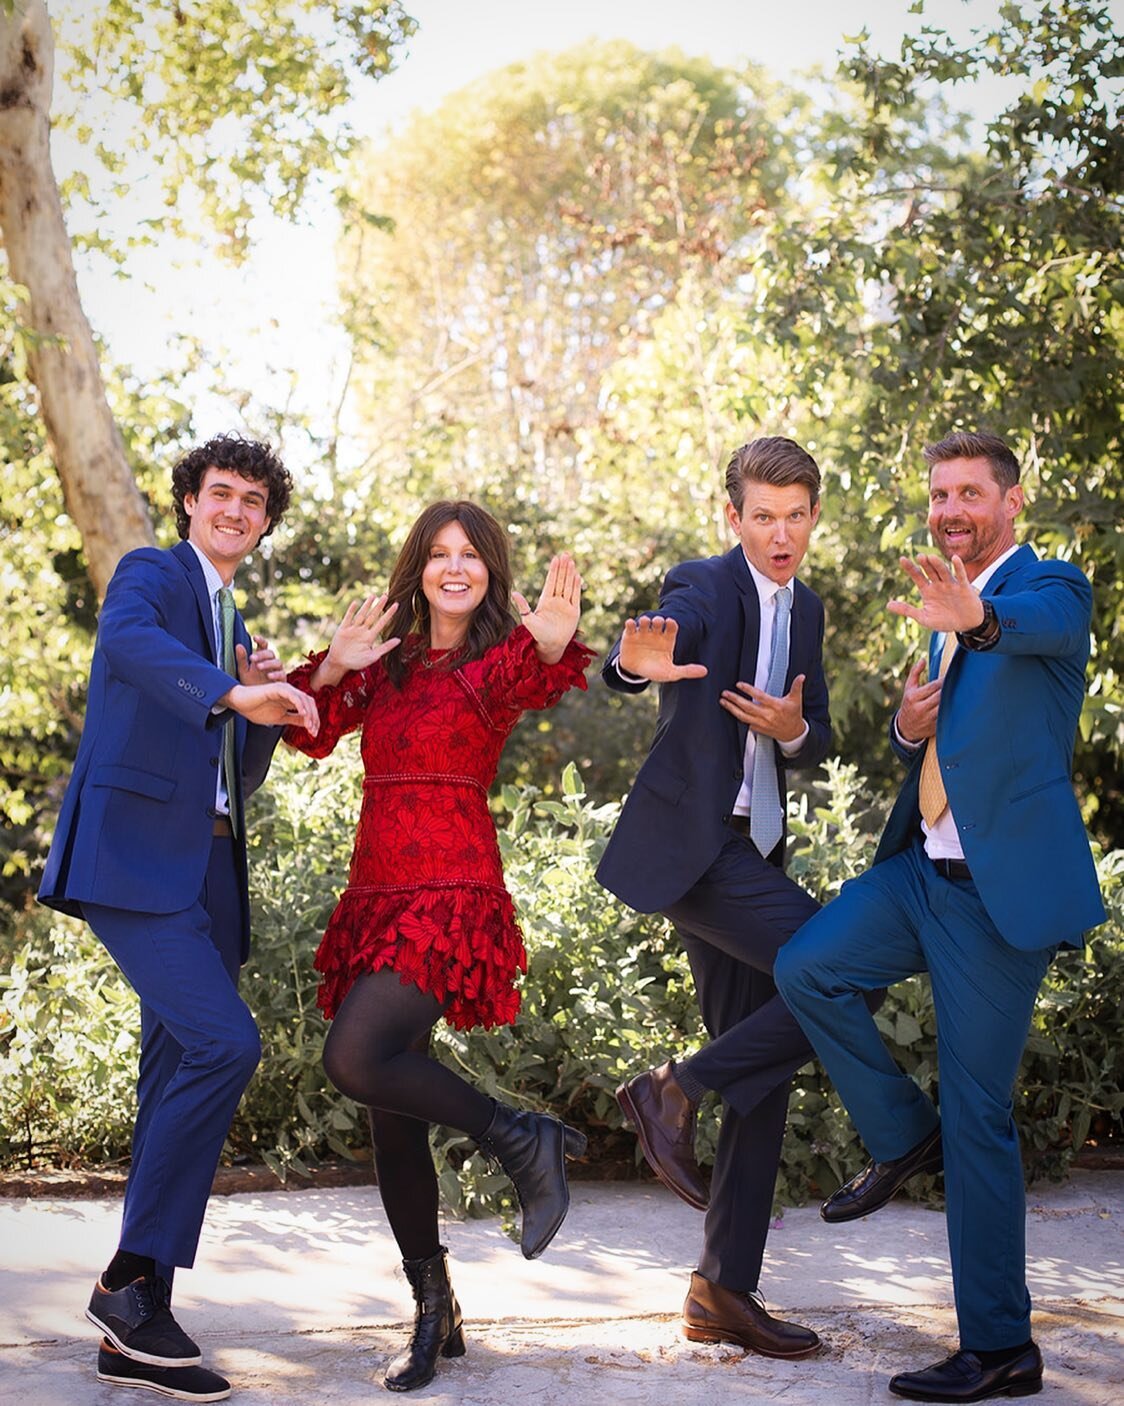 Happy #nationalsiblingsday. Here are me and my brothers doing the #heisman.